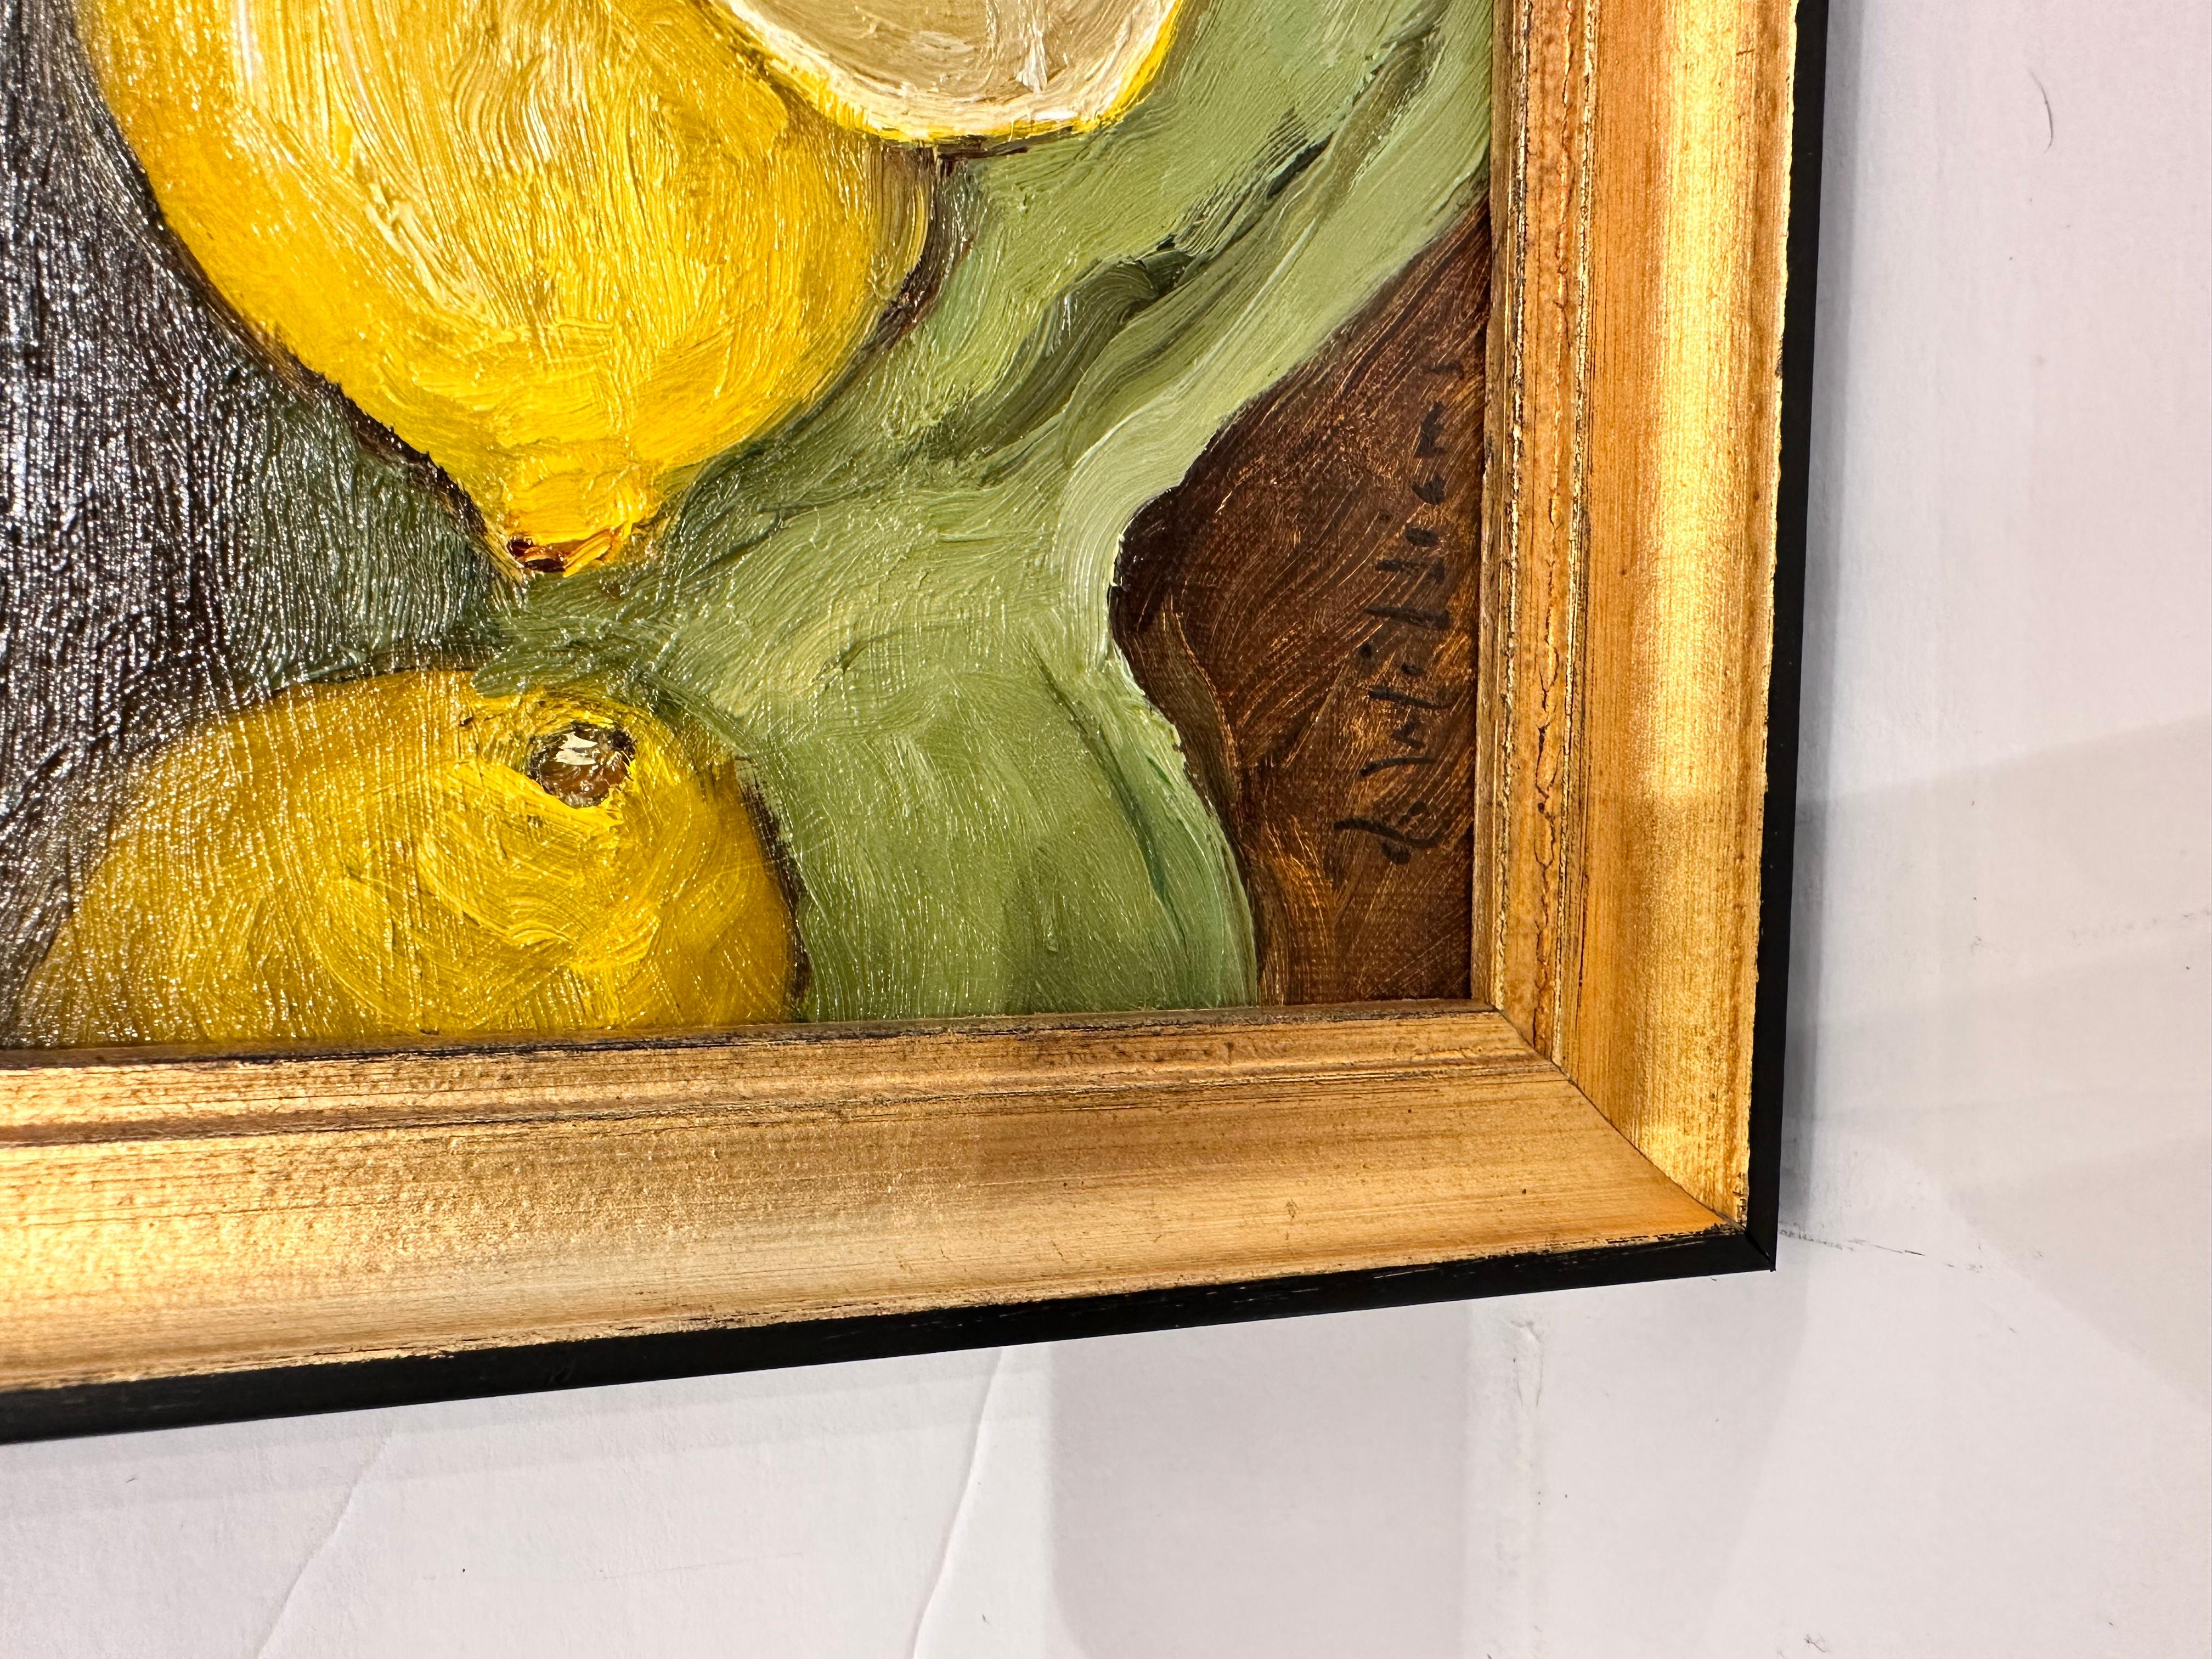 This is a beautiful original oil painting! The colors in this piece are so fresh and vibrant! The bright yellow of the lemons paired with the green of the cloth, with just a touch of the wood of the table showing is beautifully contrasting! 